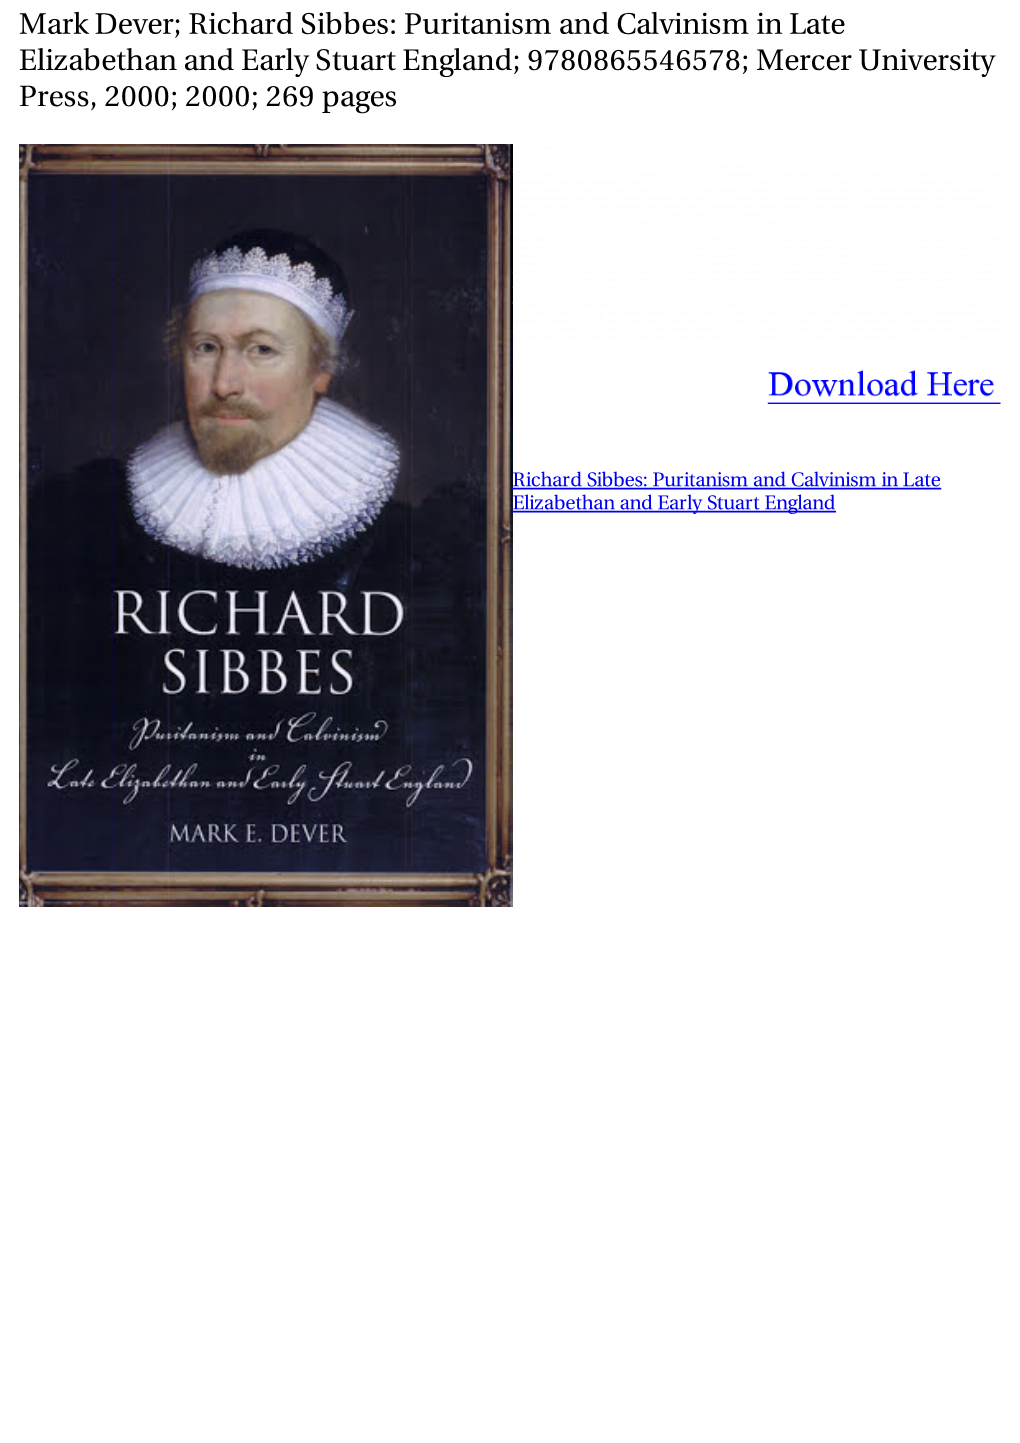 Richard Sibbes: Puritanism and Calvinism in Late Elizabethan and Early Stuart England; 9780865546578; Mercer University Press, 2000; 2000; 269 Pages